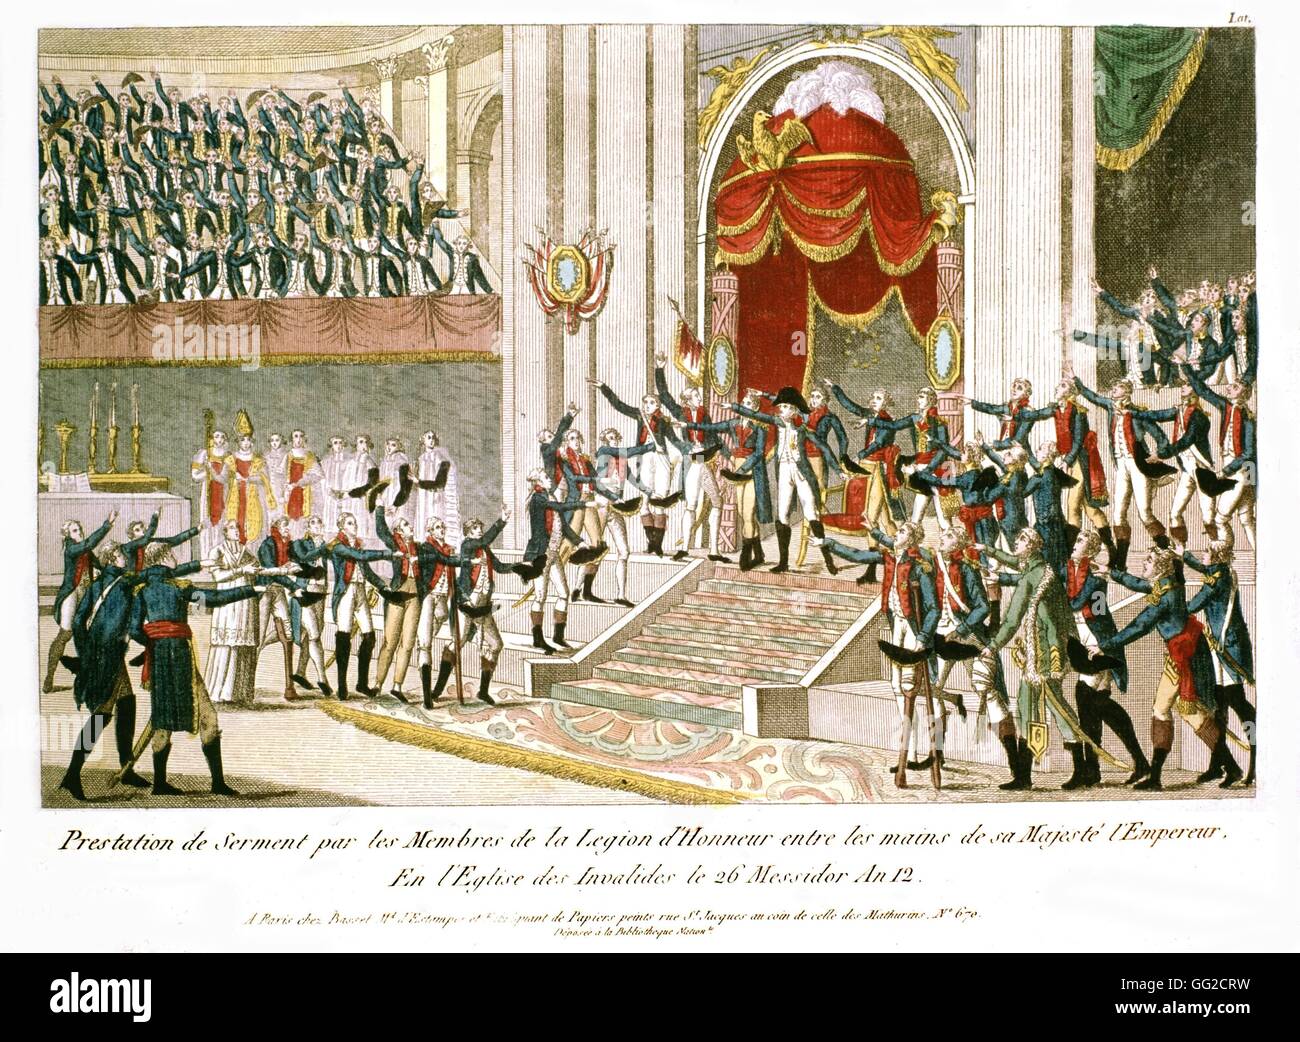 Anonymous Members of the Legion of Honour taking the oath in front of Emperor Napoleon I 19th century France Stock Photo